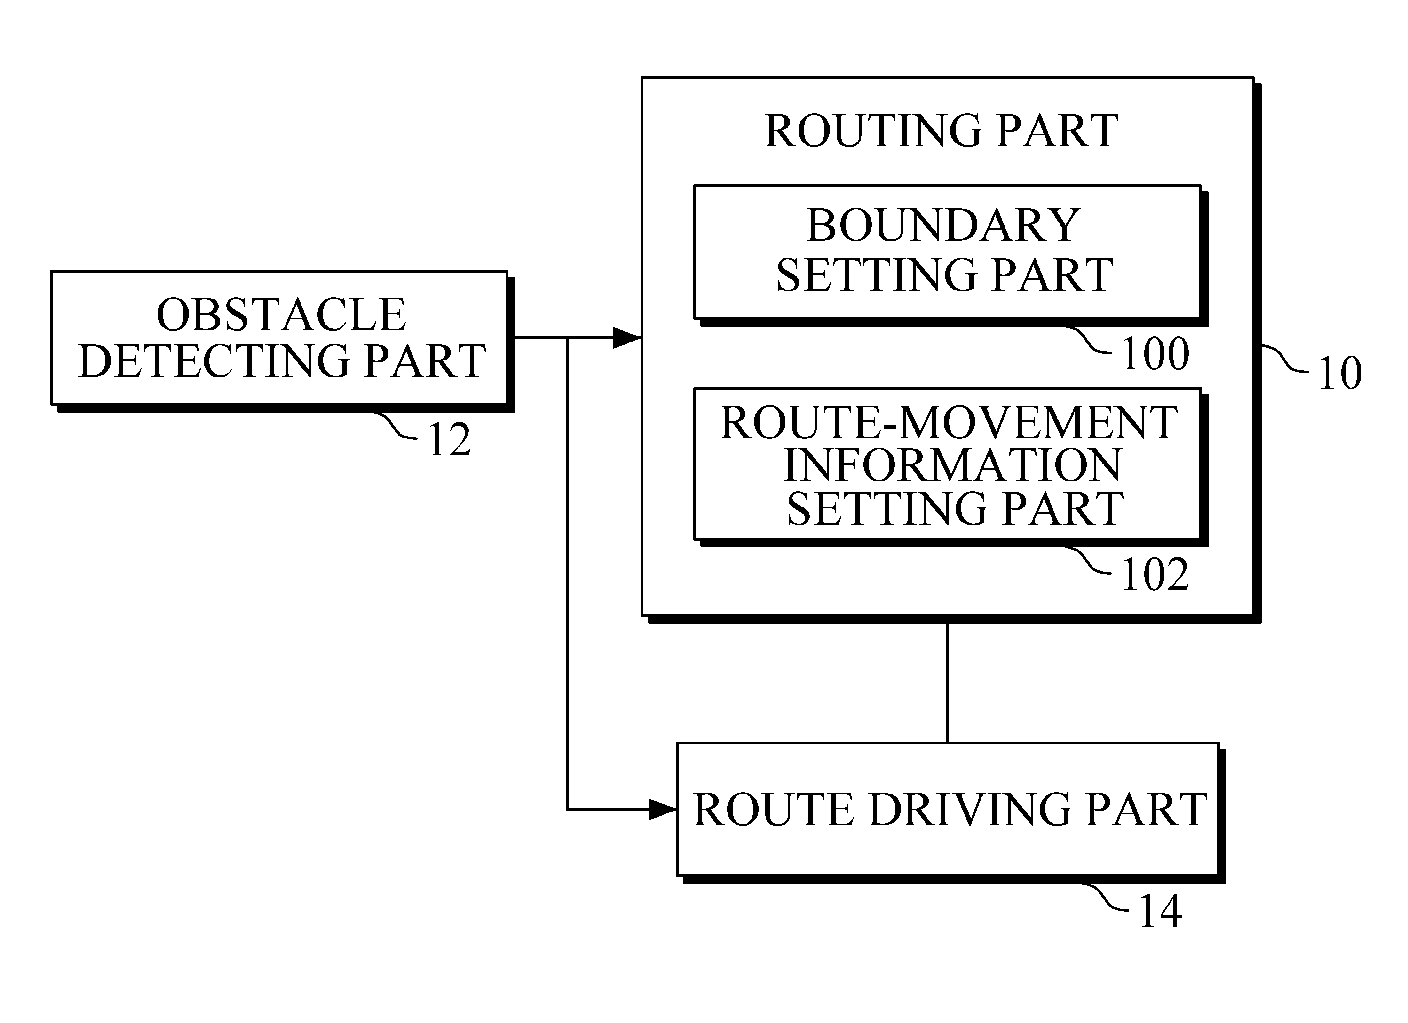 Unmanned vehicle driving apparatus and method for obstacle avoidance